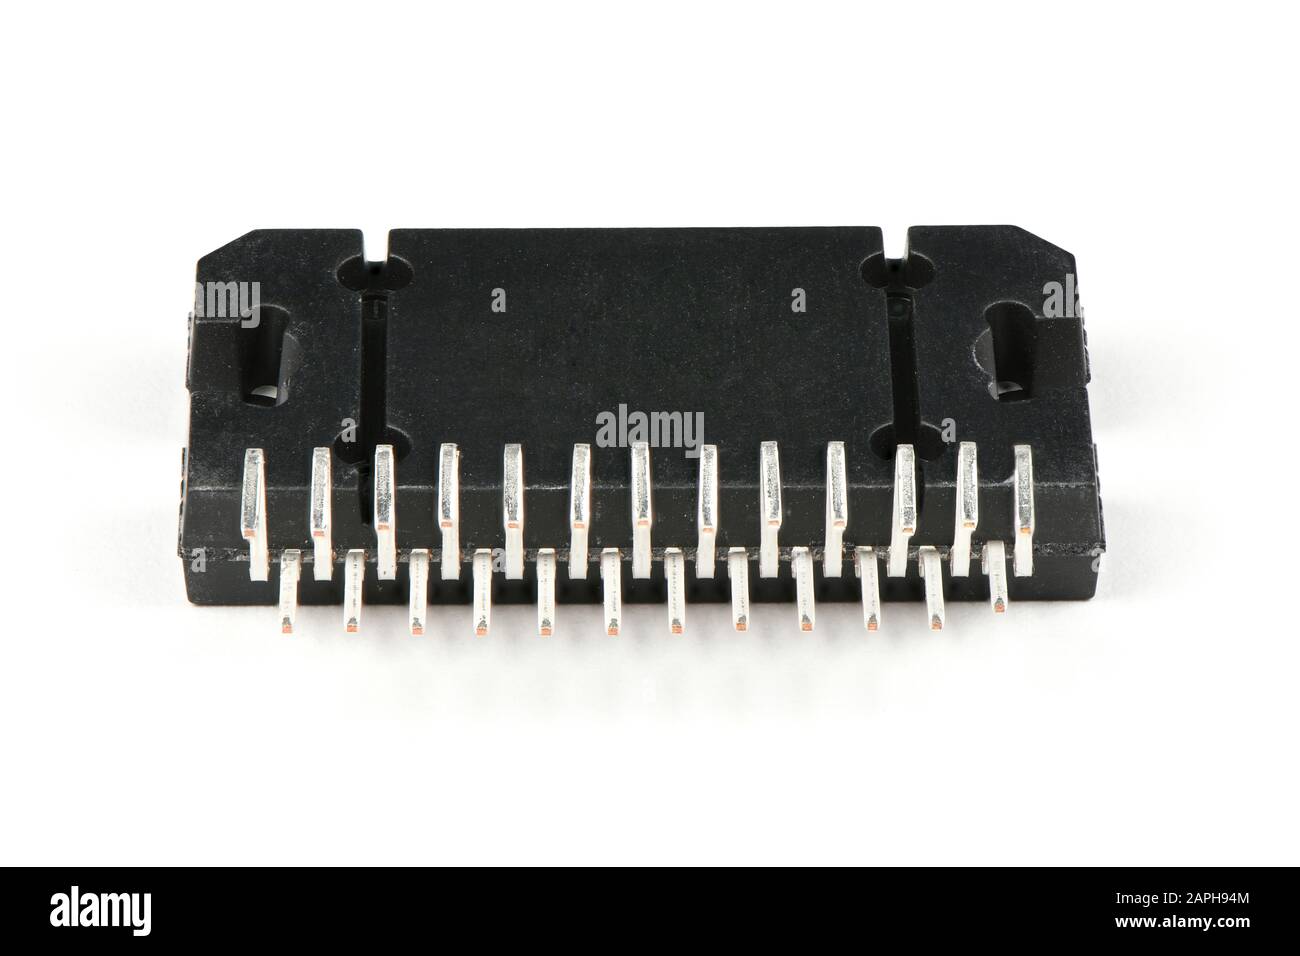 New microchip low frequency amplifier ULF isolated on a white background. High resolution photo. Full depth of field. Stock Photo